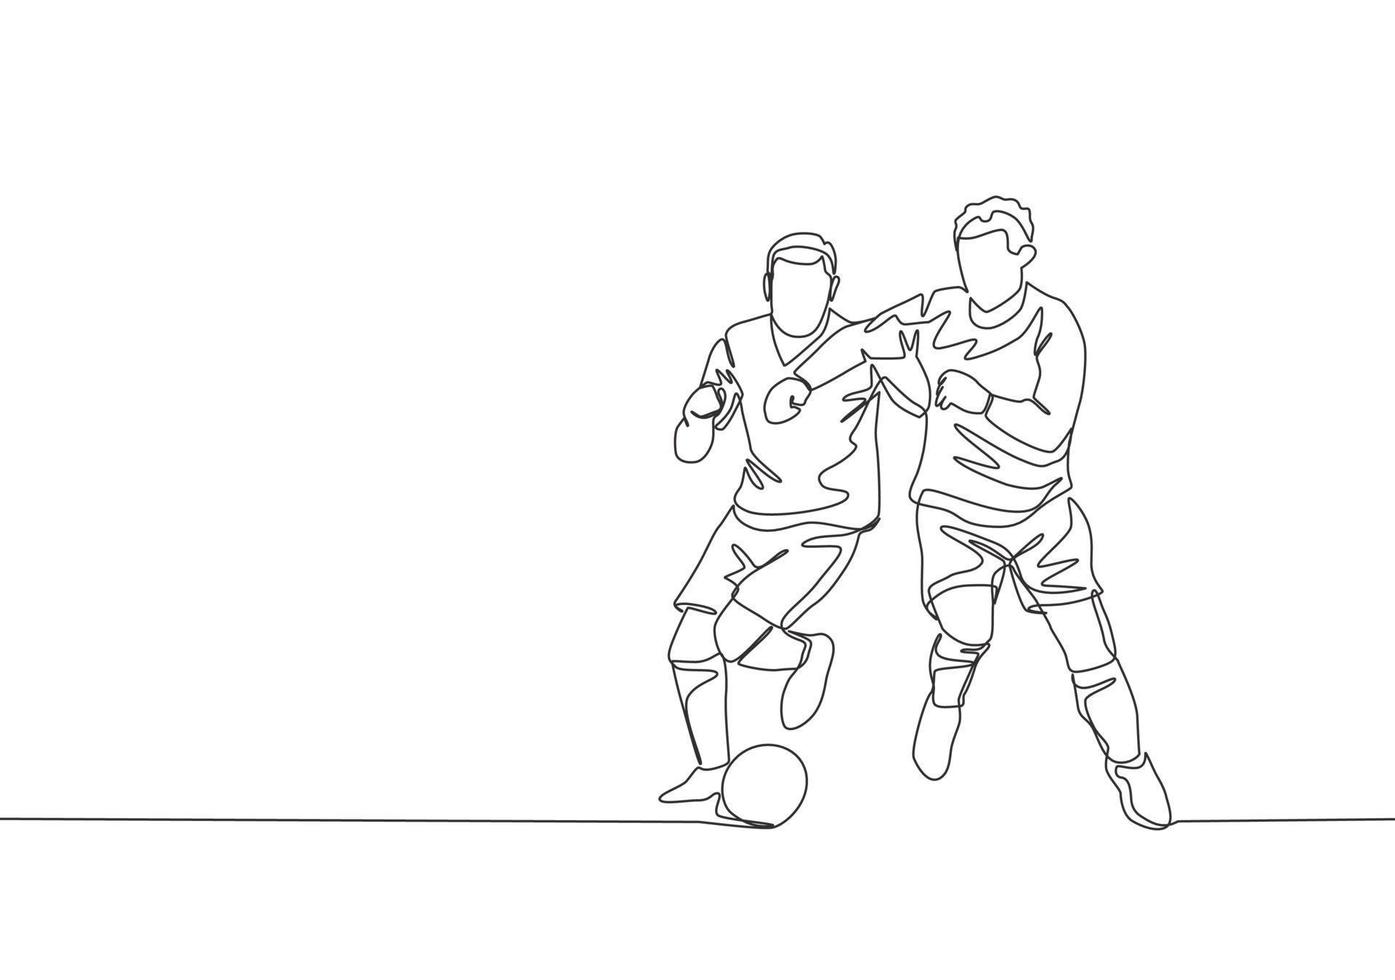 Single continuous line drawing of young energetic football player elbow opponent player while fighting for the ball. Soccer match sports concept. One line draw design vector illustration